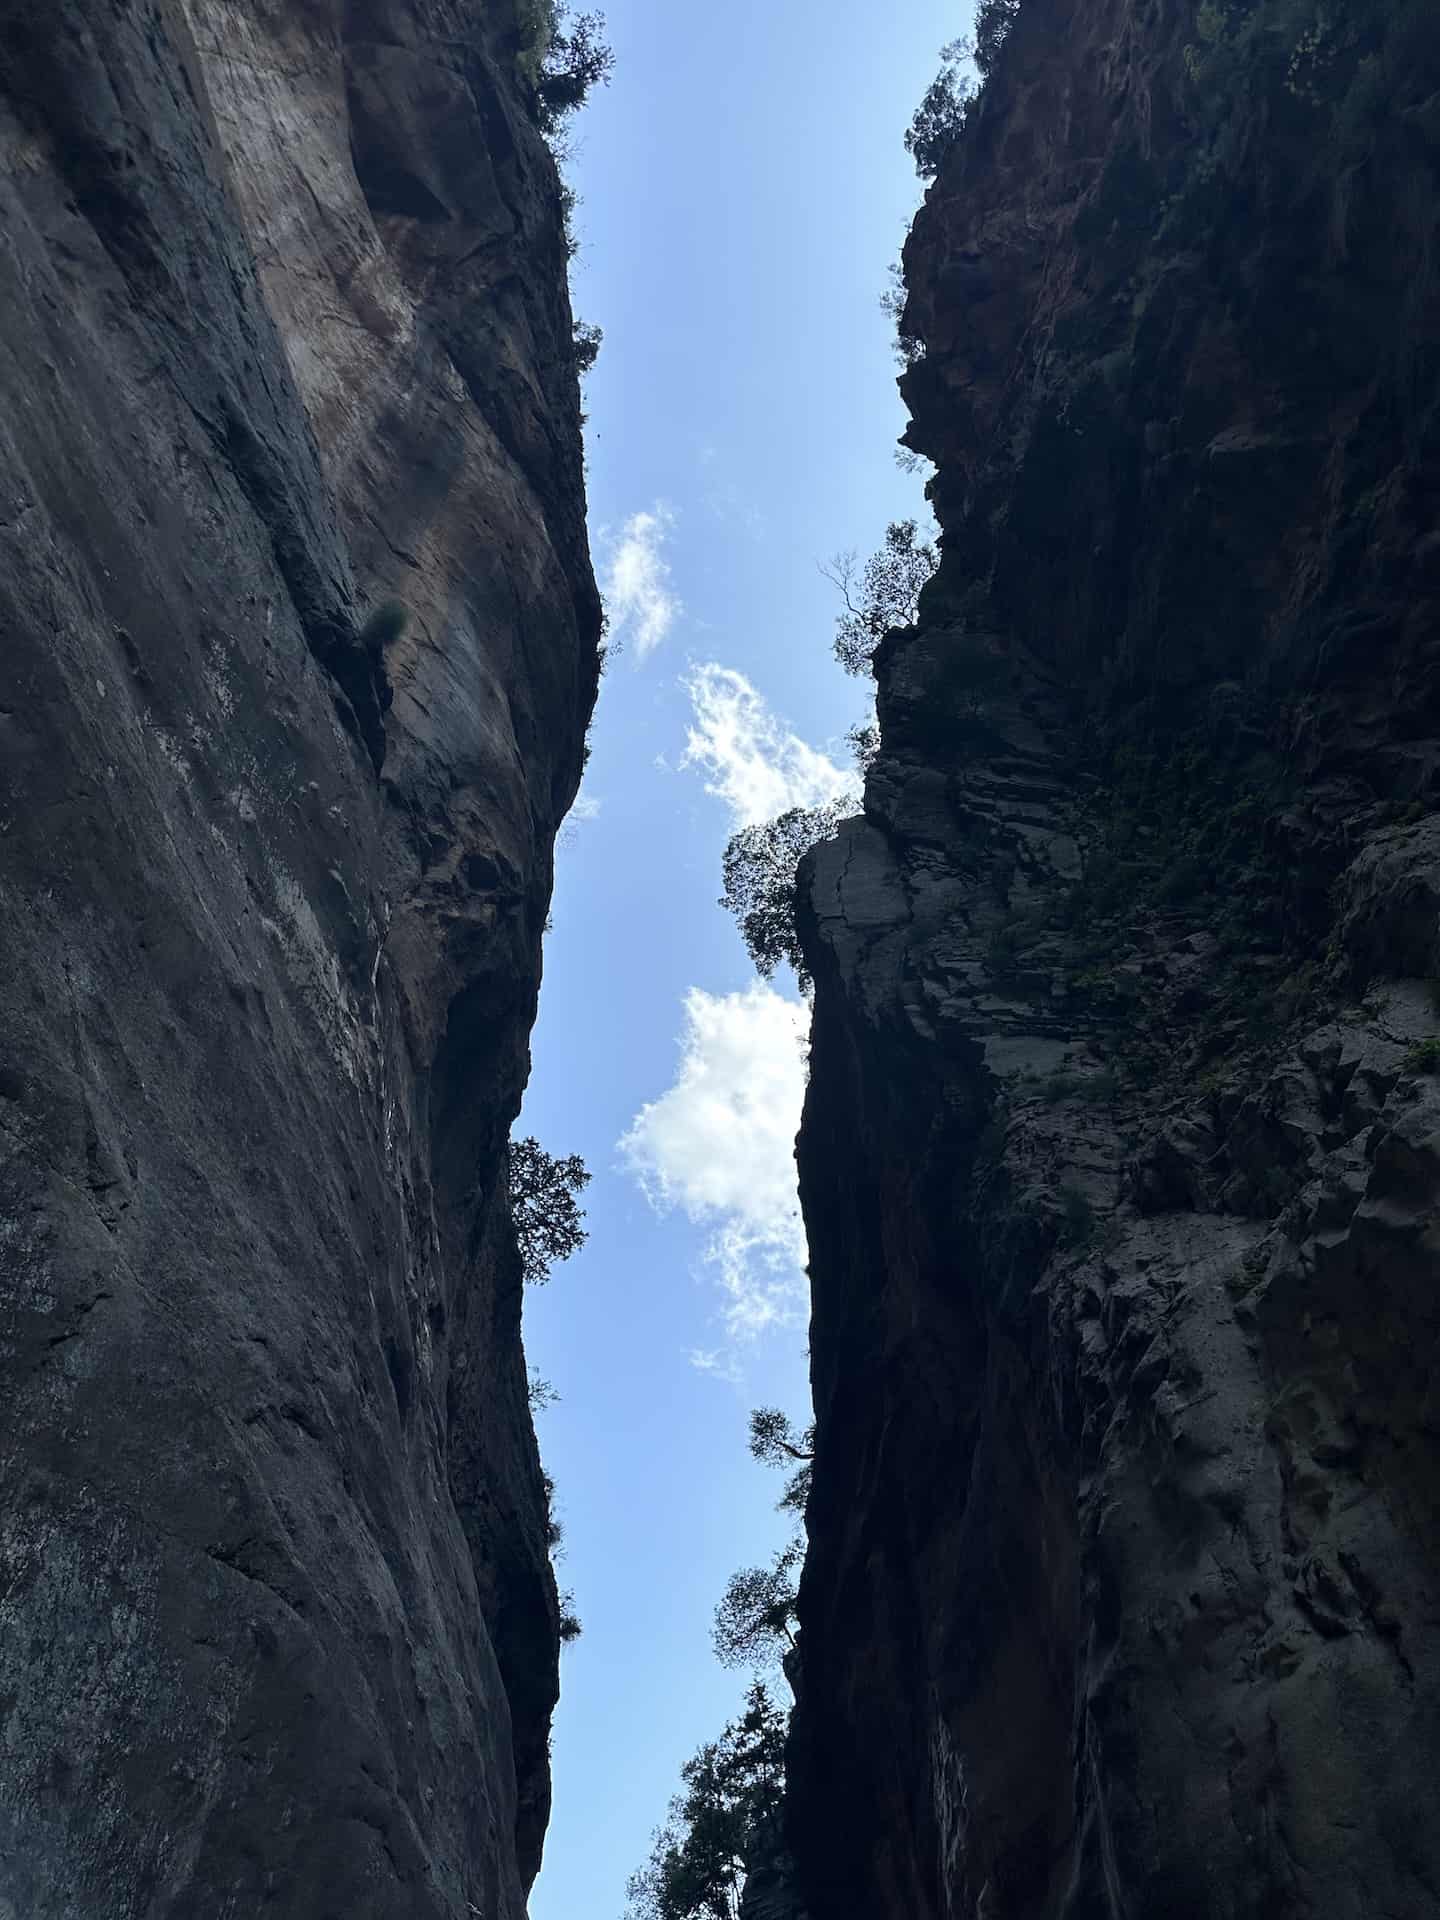 Looking up at the Gates at the Samaria Gorge in Crete, Greece